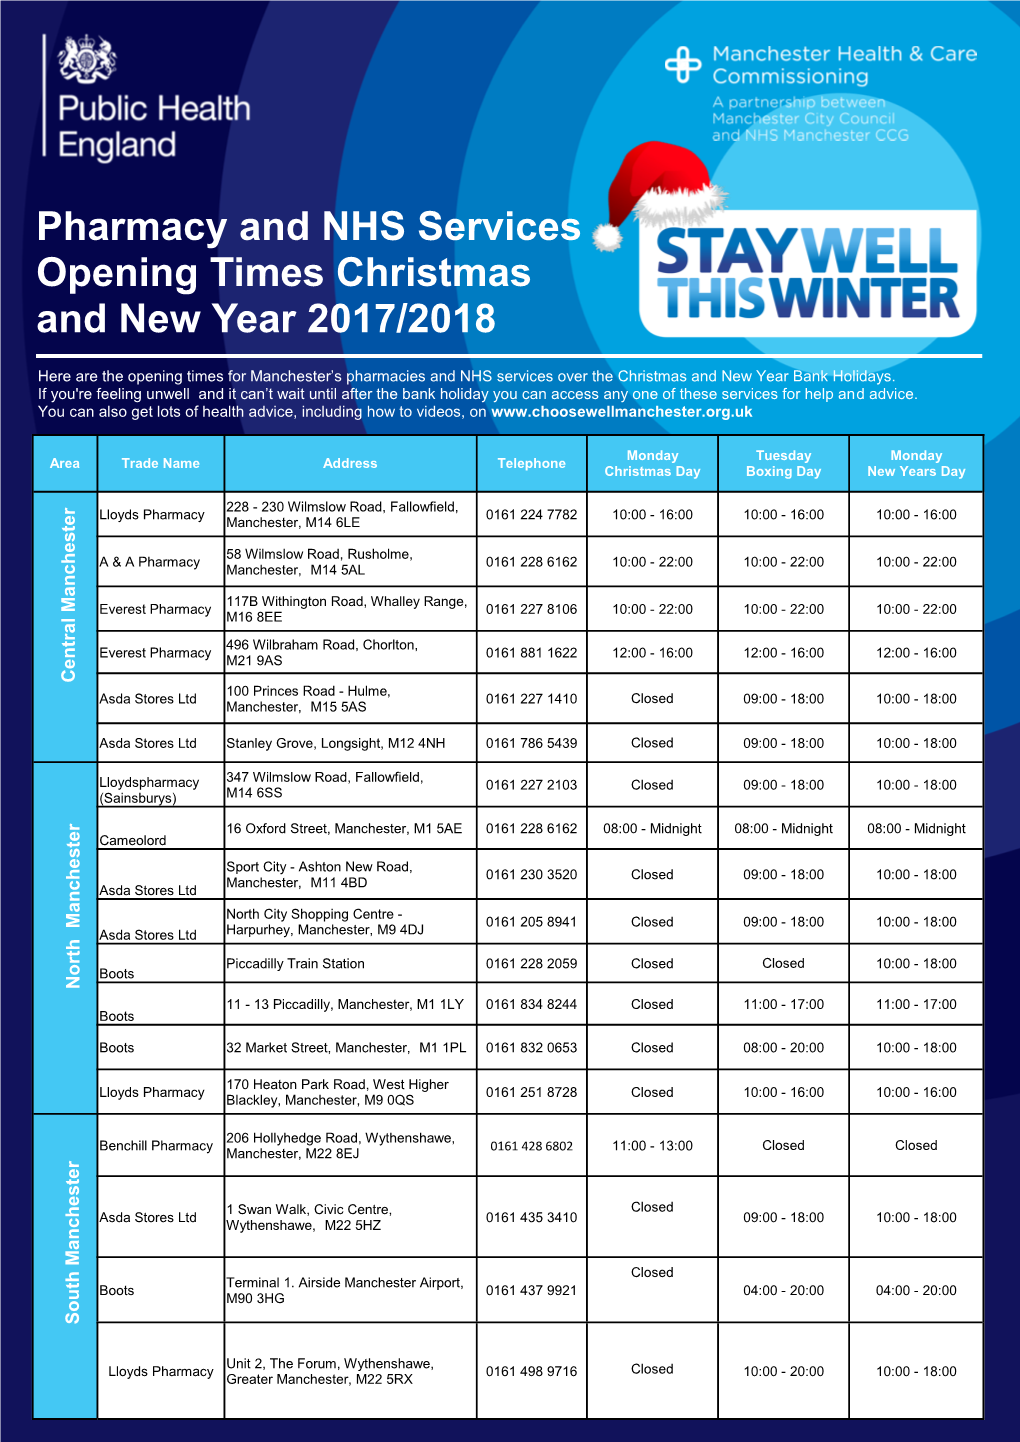 Pharmacy and NHS Services Opening Times Christmas and New Year 2017/2018